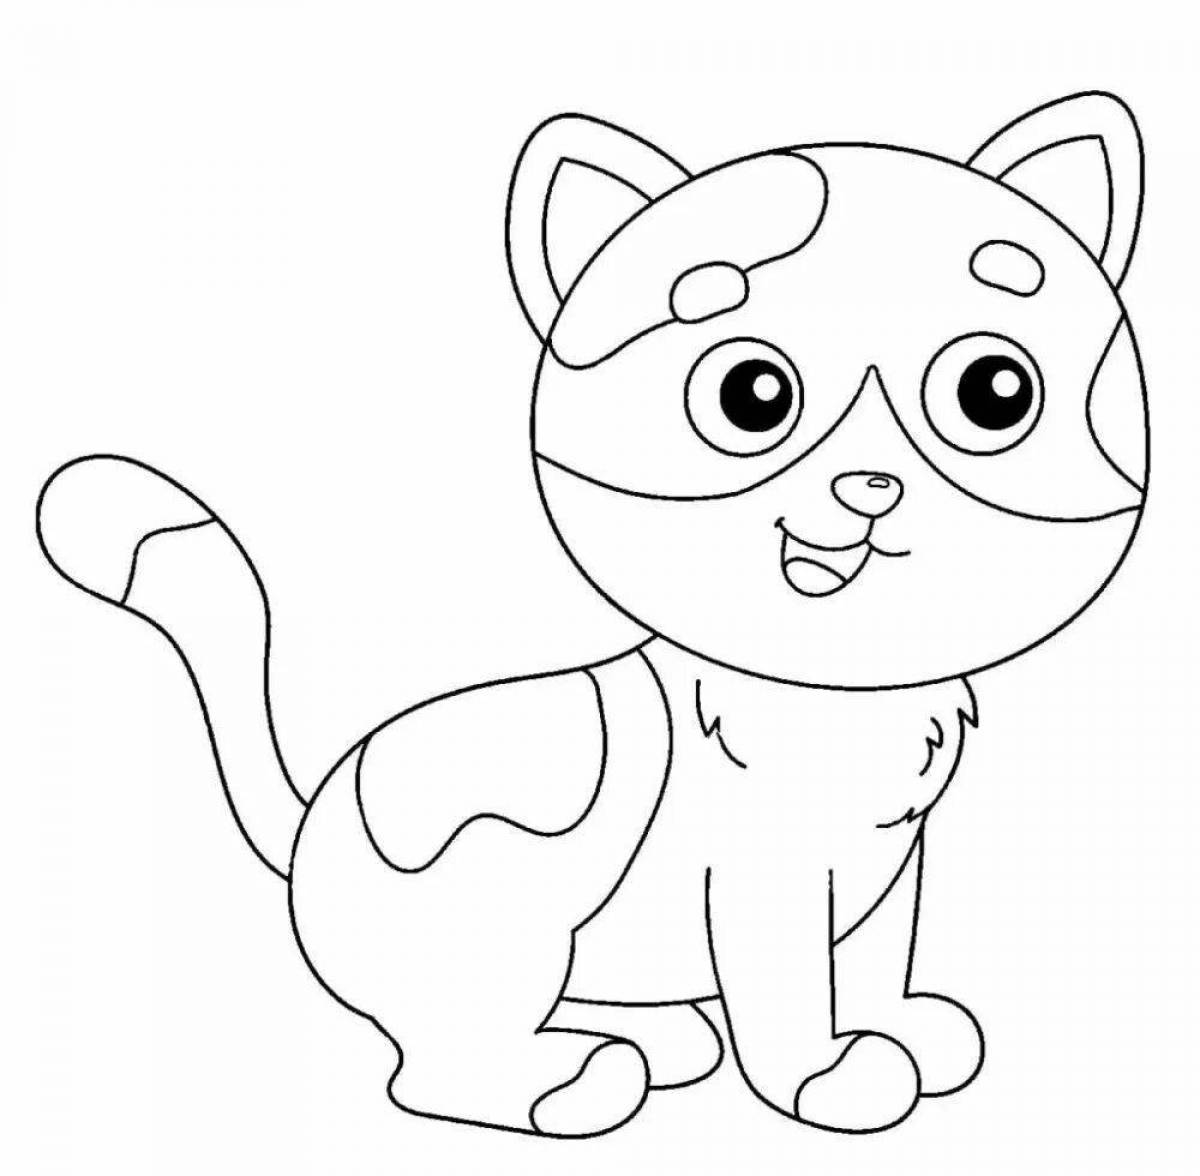 Coloring page cheerful kitten booboo